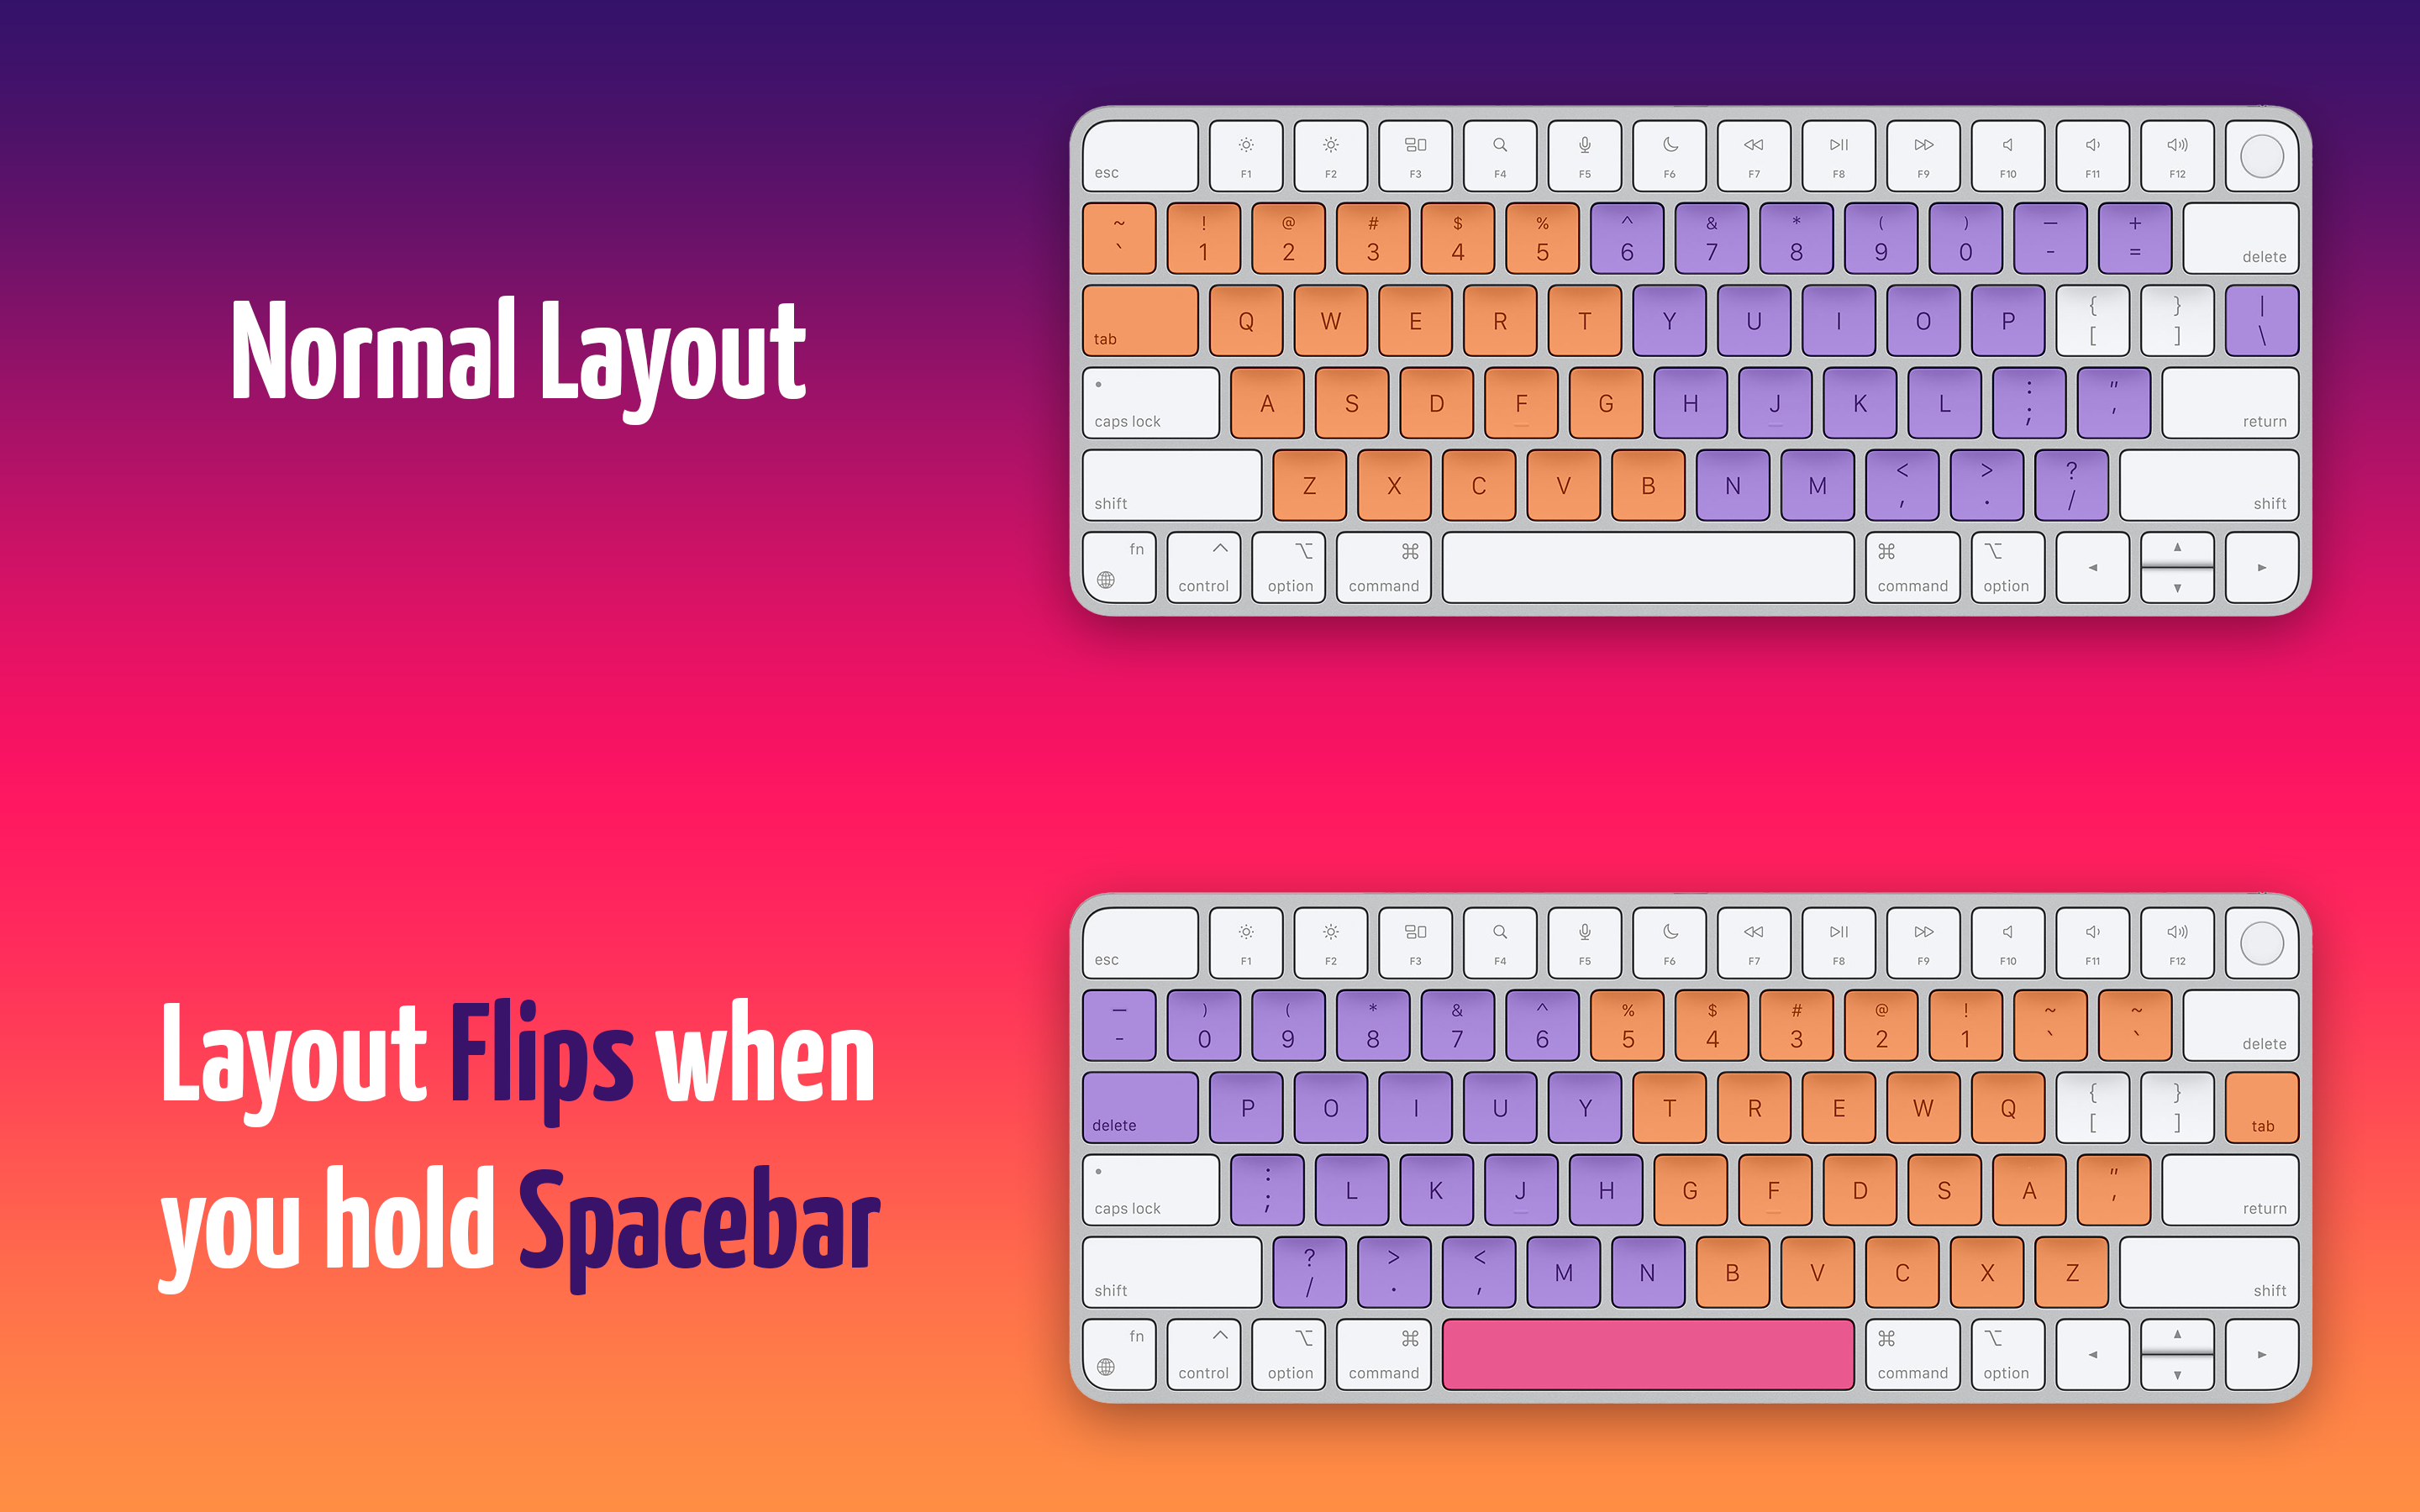 Graphic illustrating how the left and right halves of the keyboard layout mirror and swap places when the spacebar is held down.